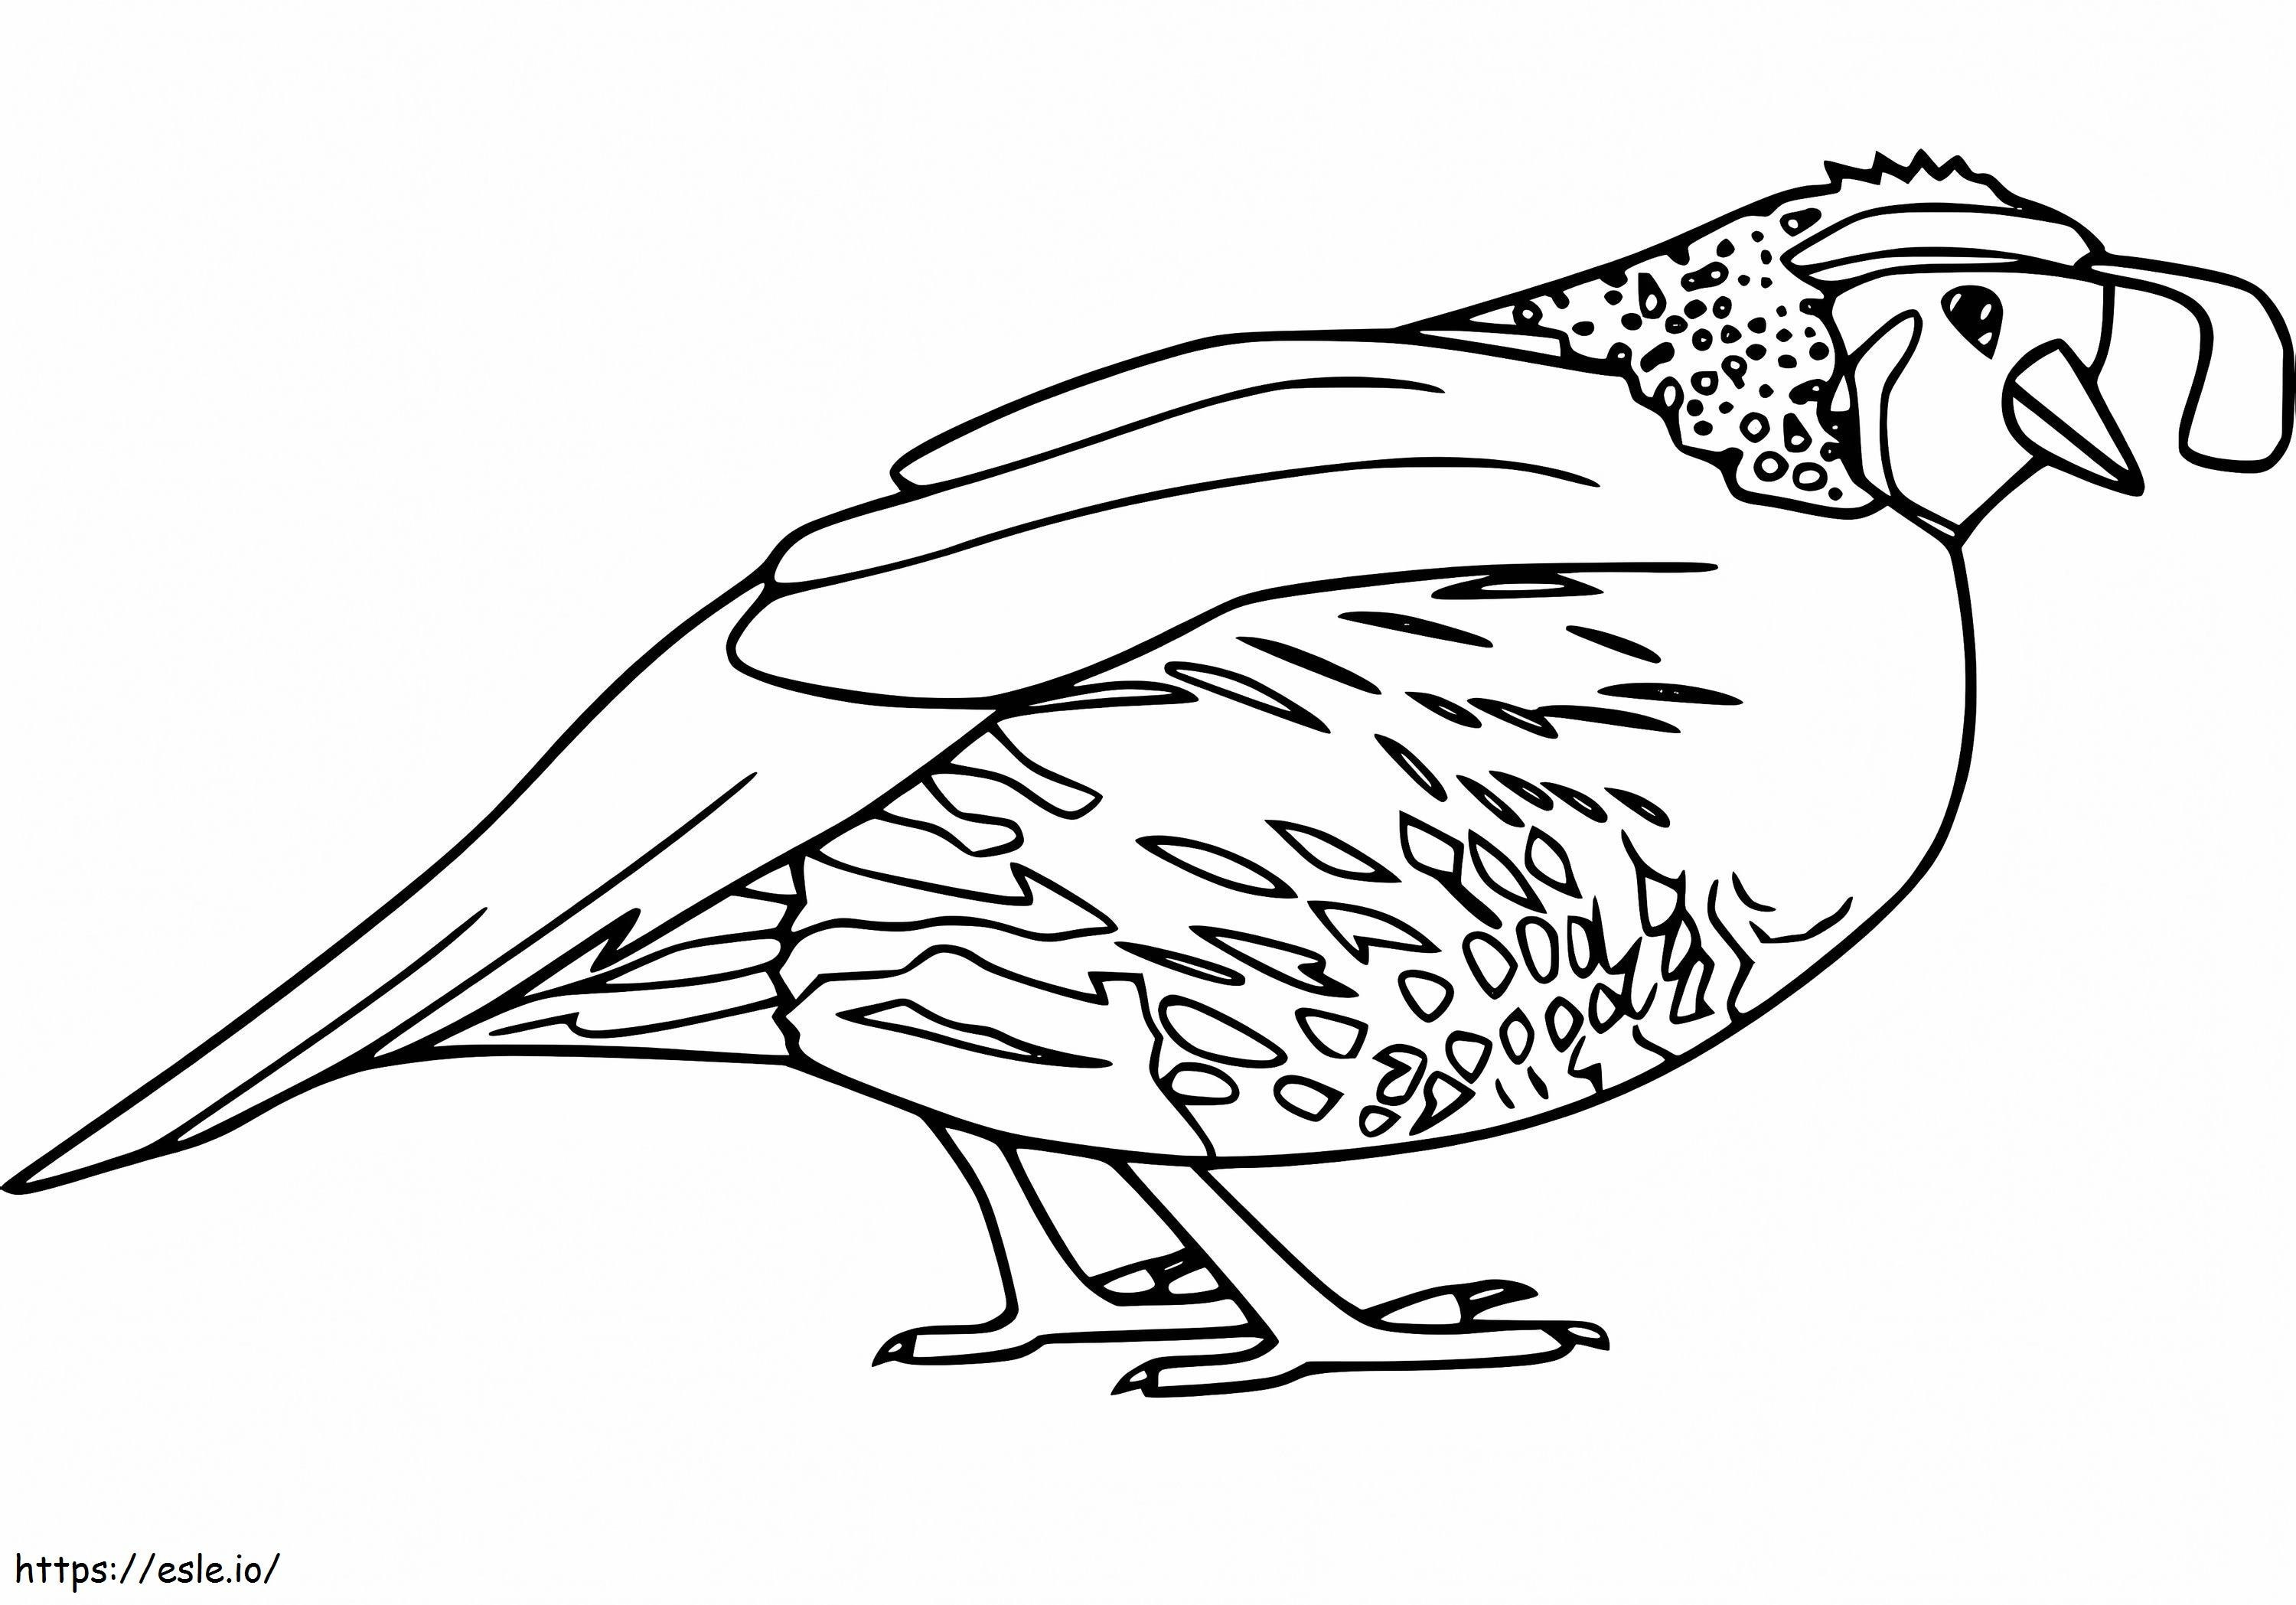 Quail 3 coloring page